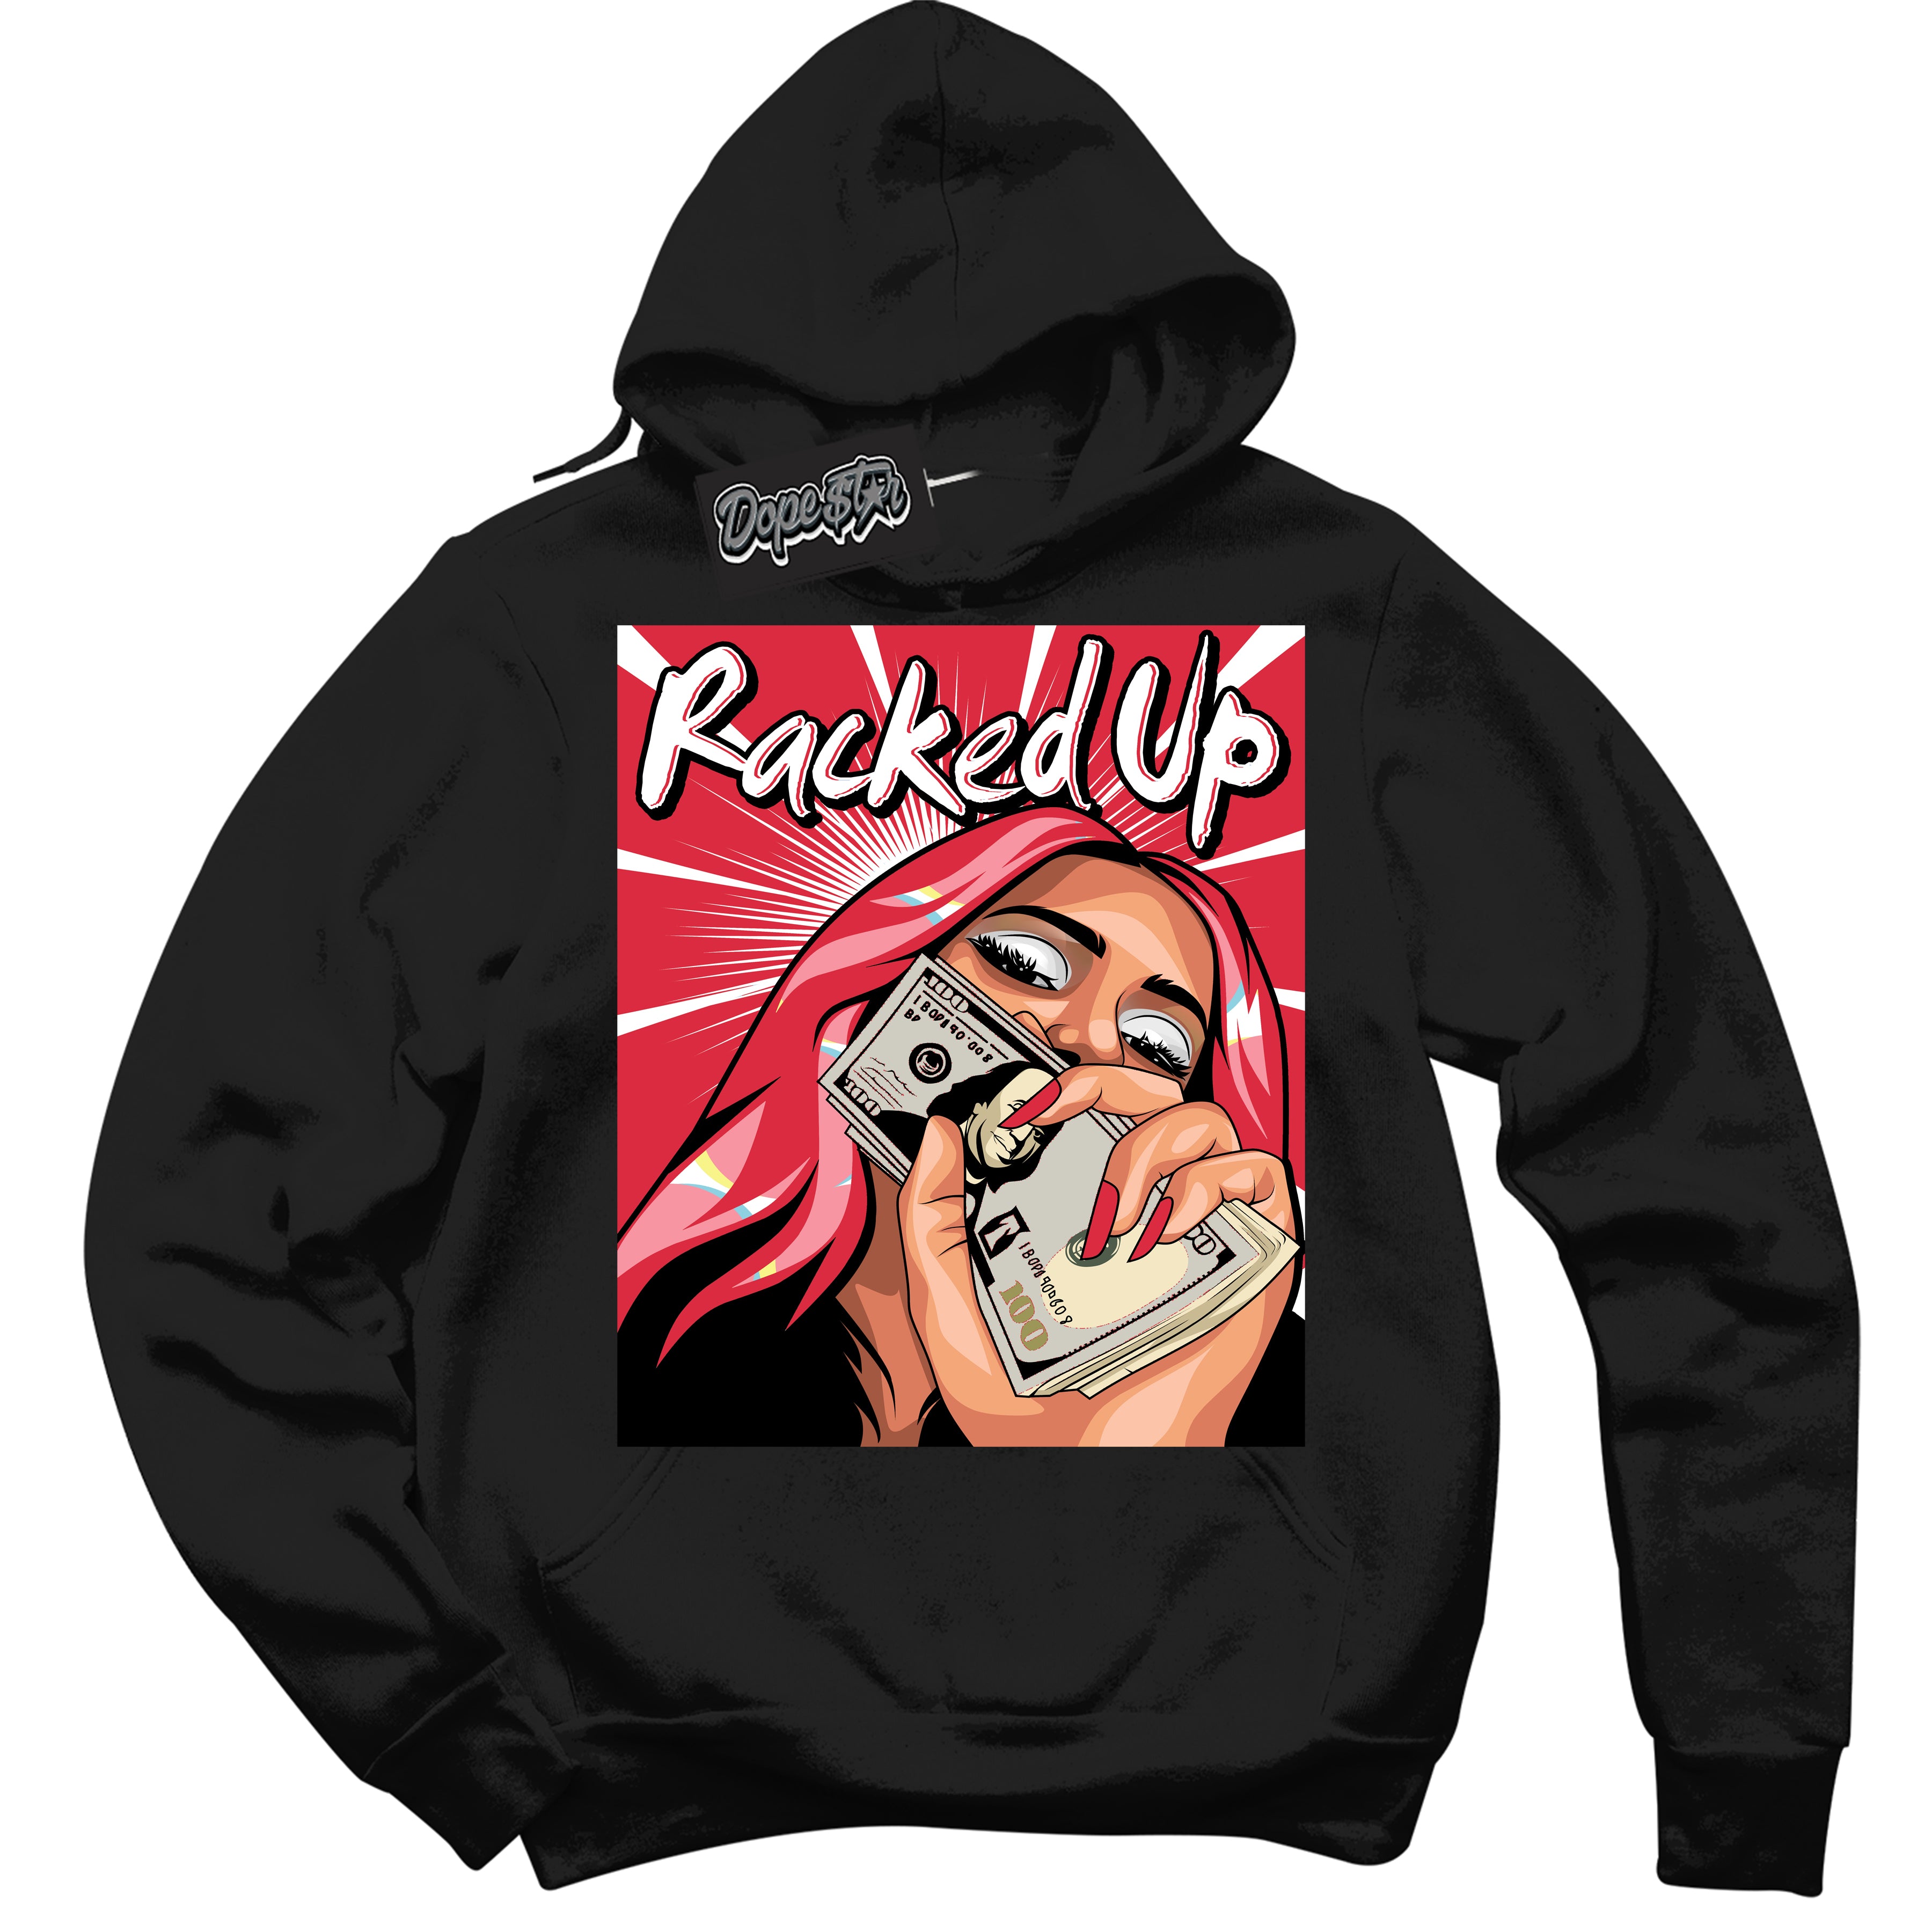 Cool Black Graphic DopeStar Hoodie with “ Racked Up “ print, that perfectly matches Spider-Verse 1s sneakers